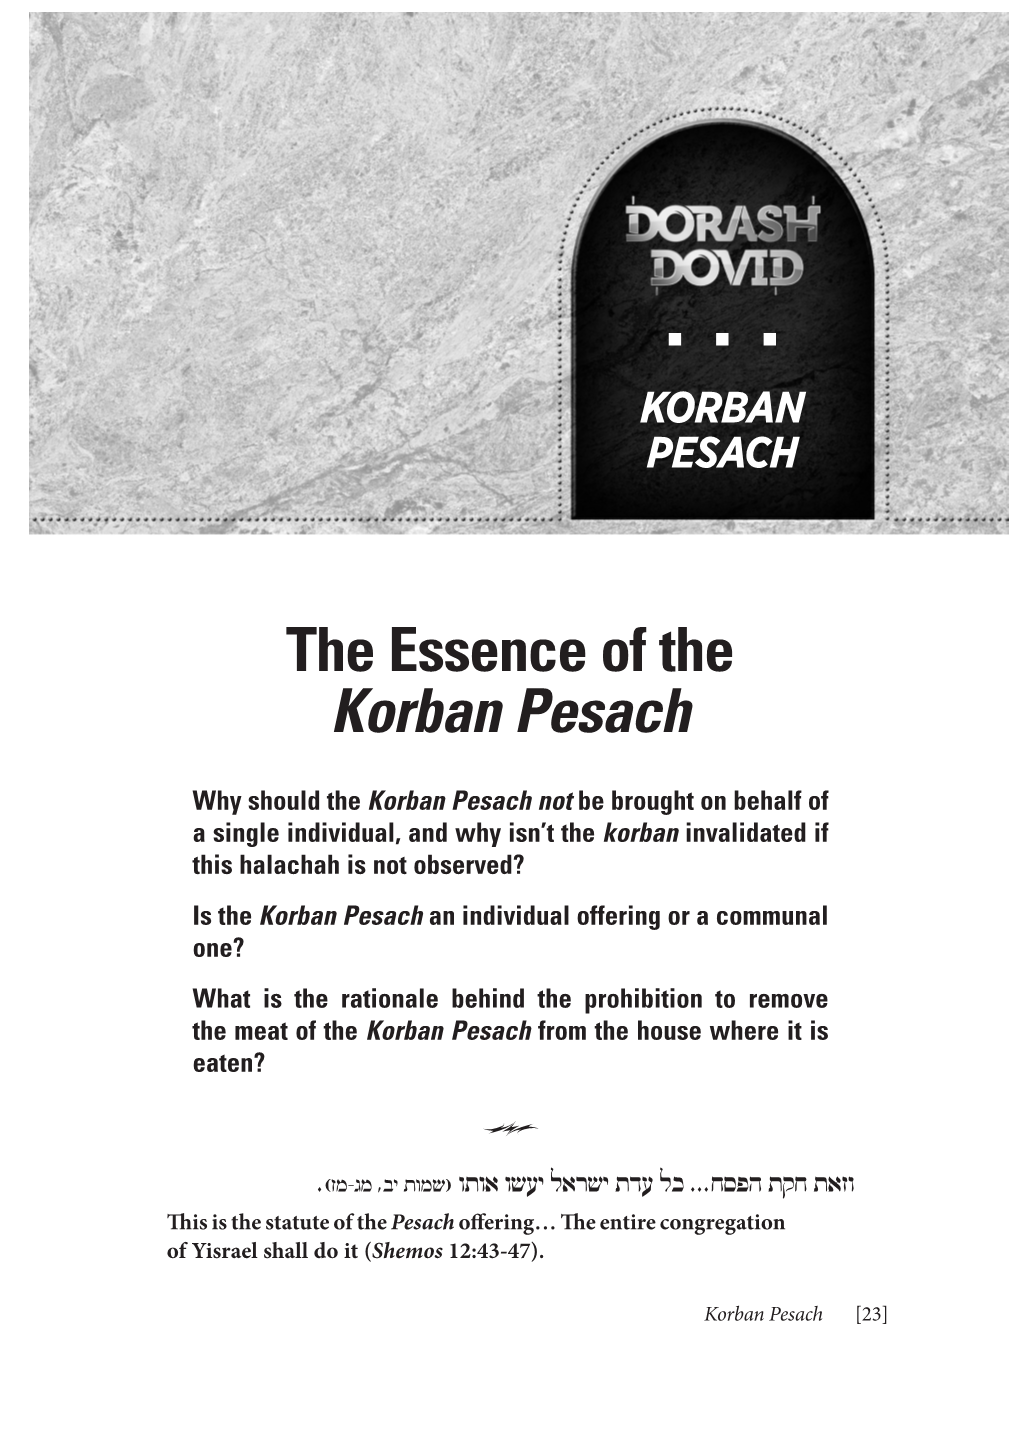 The Essence of the Korban Pesach